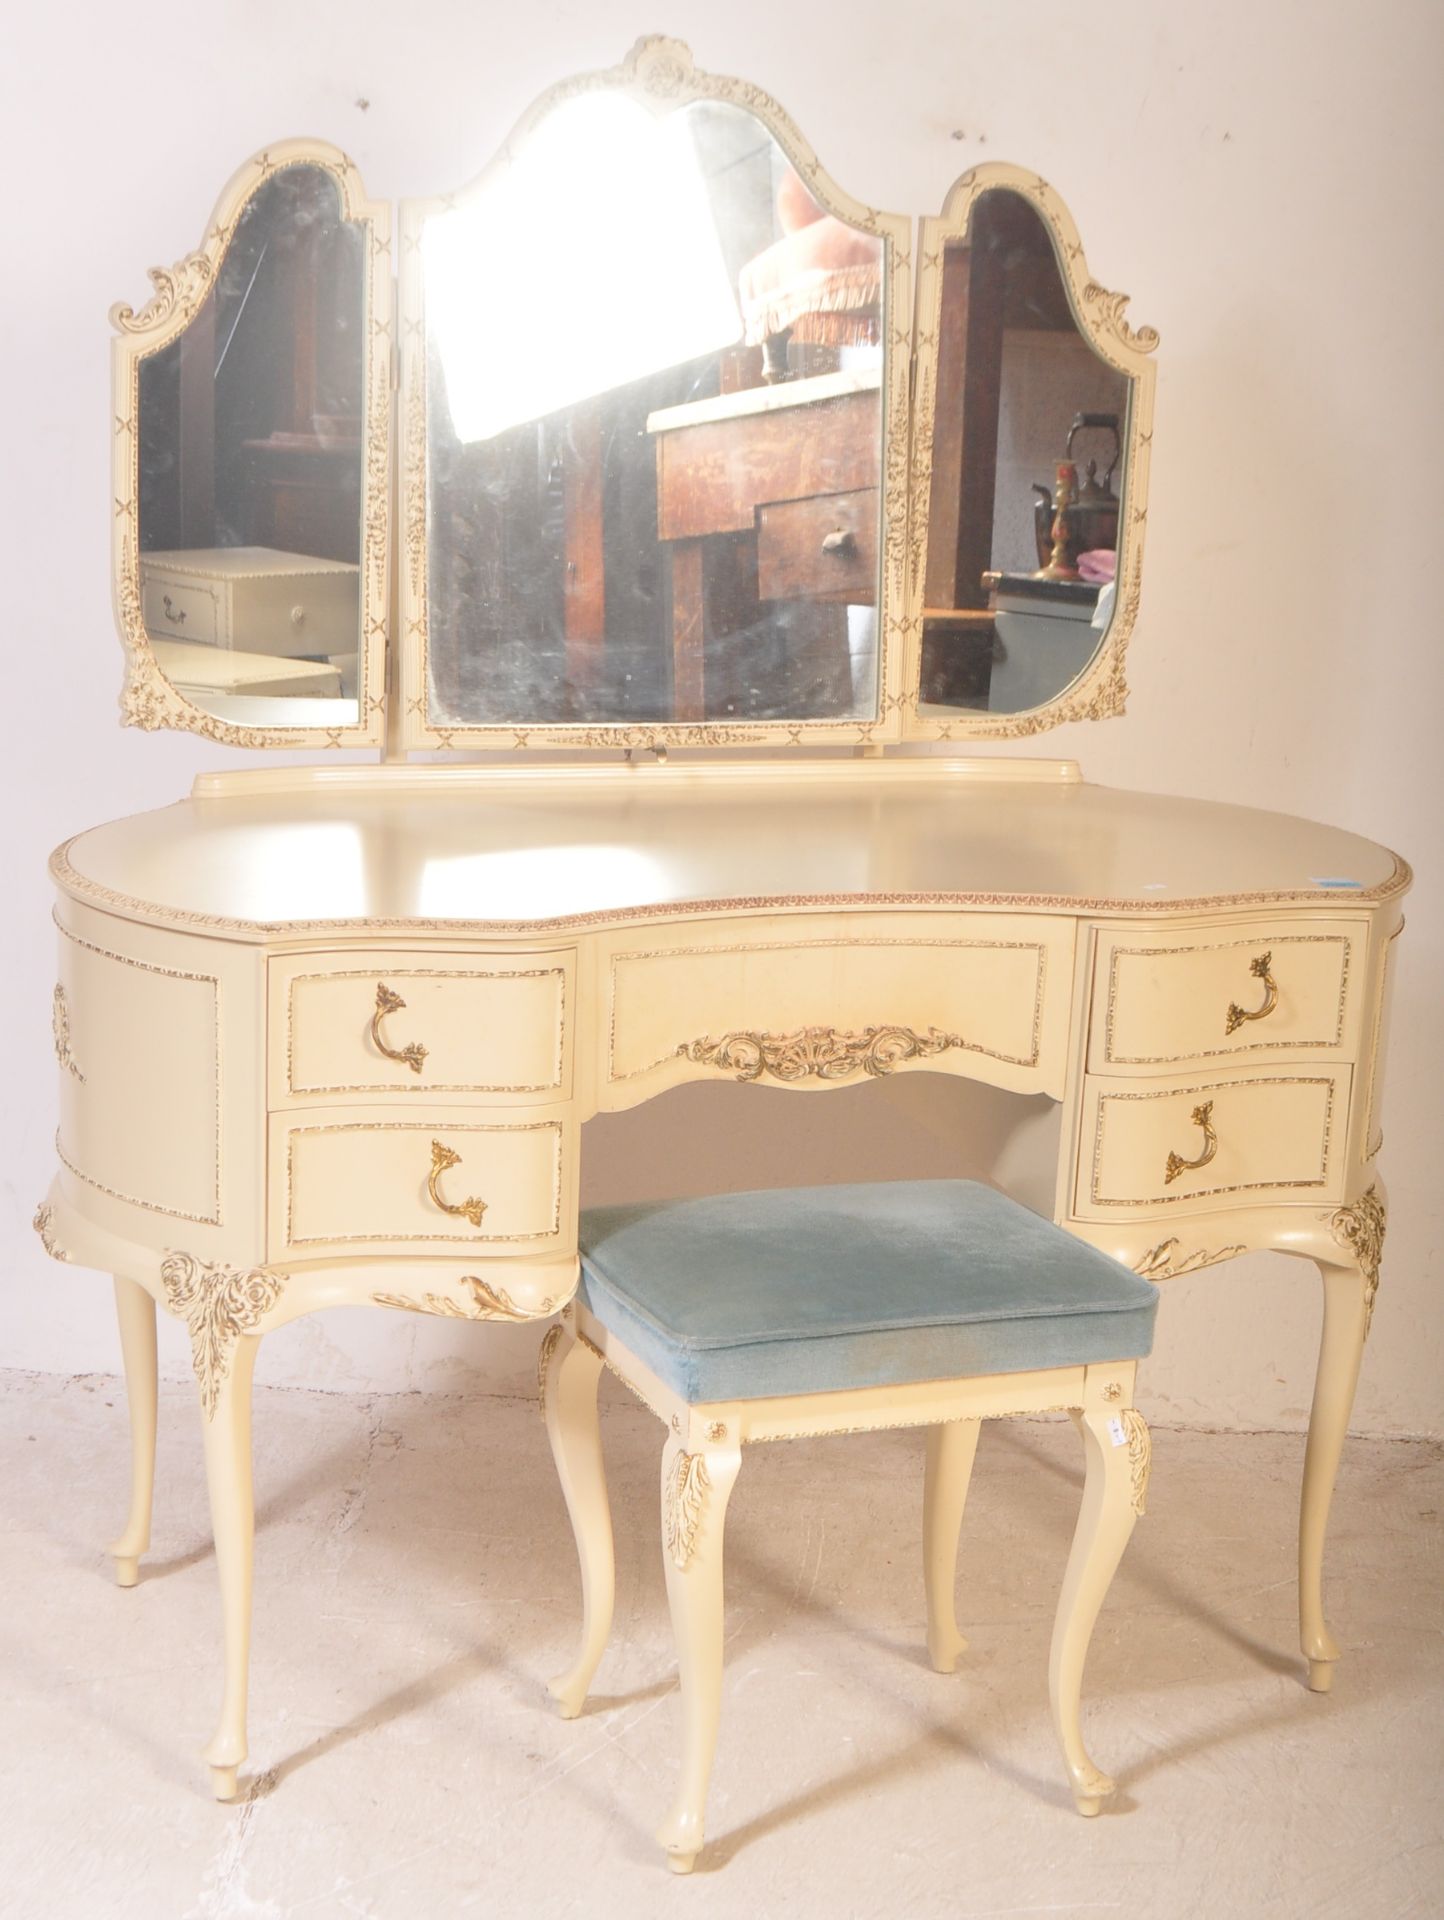 LOUIS XV STYLE PAINTED DRESSING TABLE - Image 6 of 7